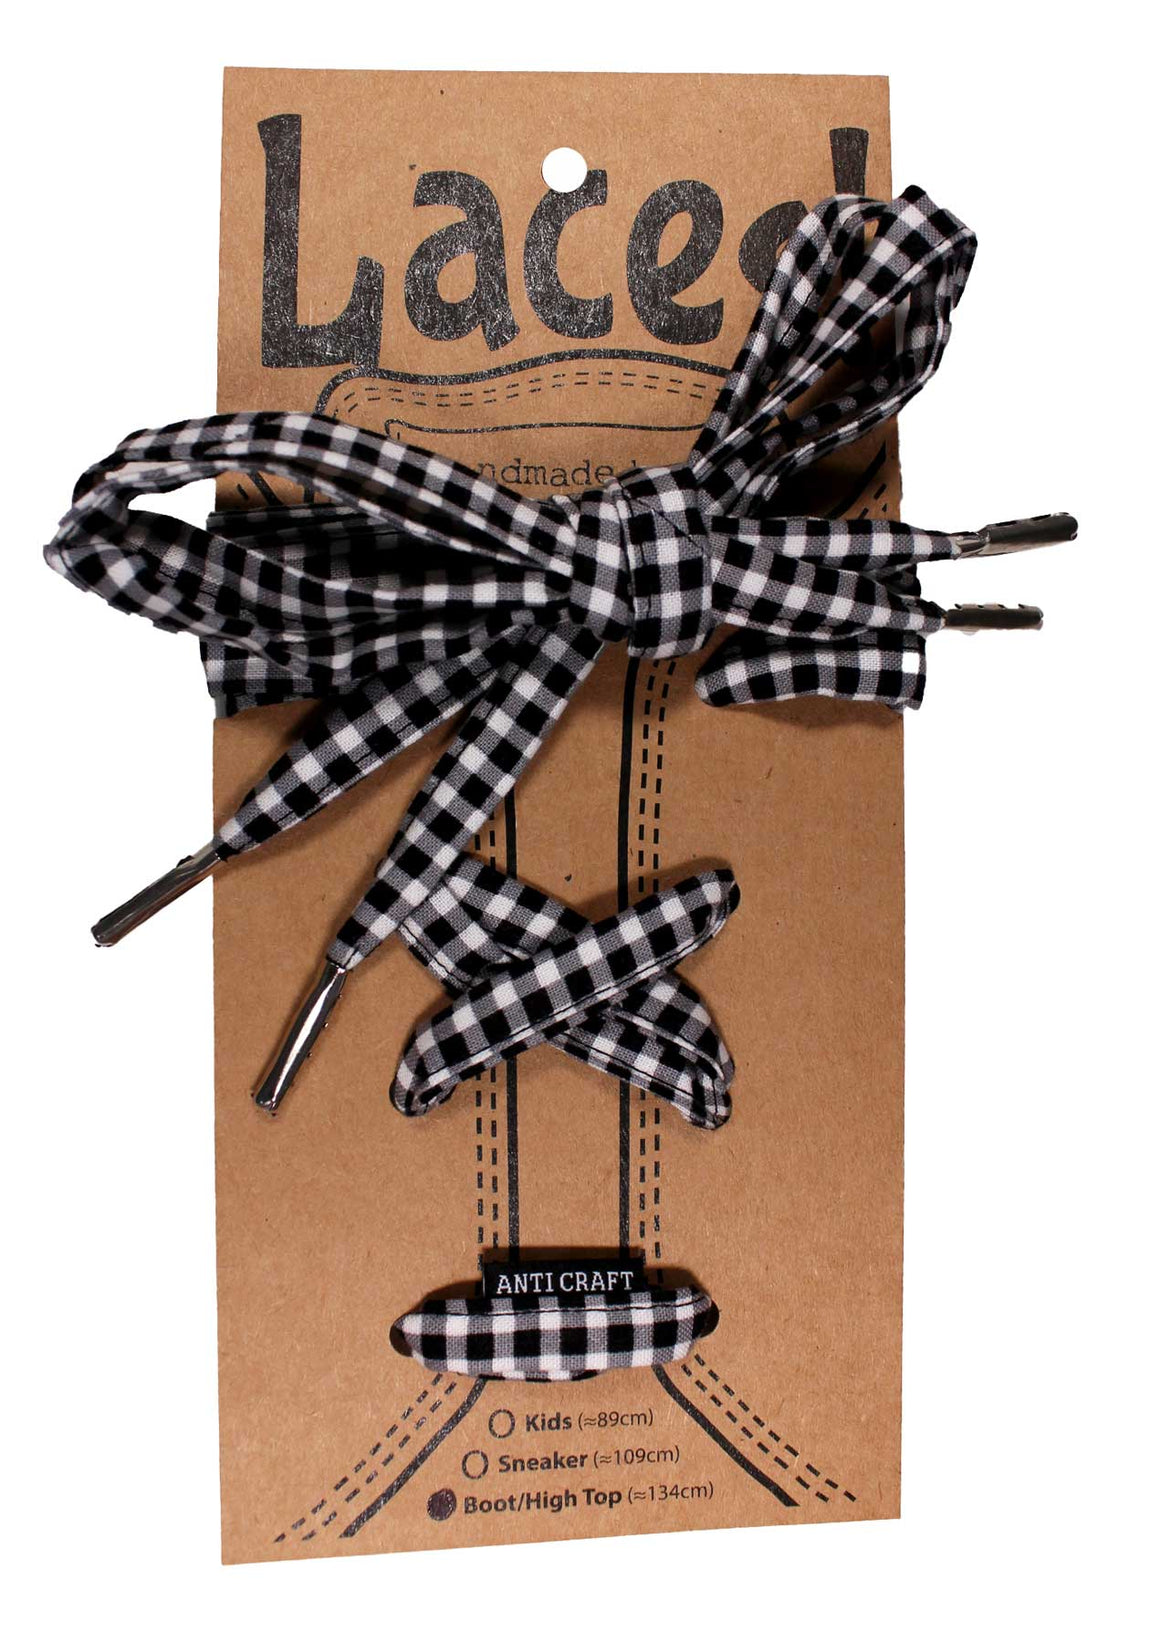 Laces - Black & White Gingham